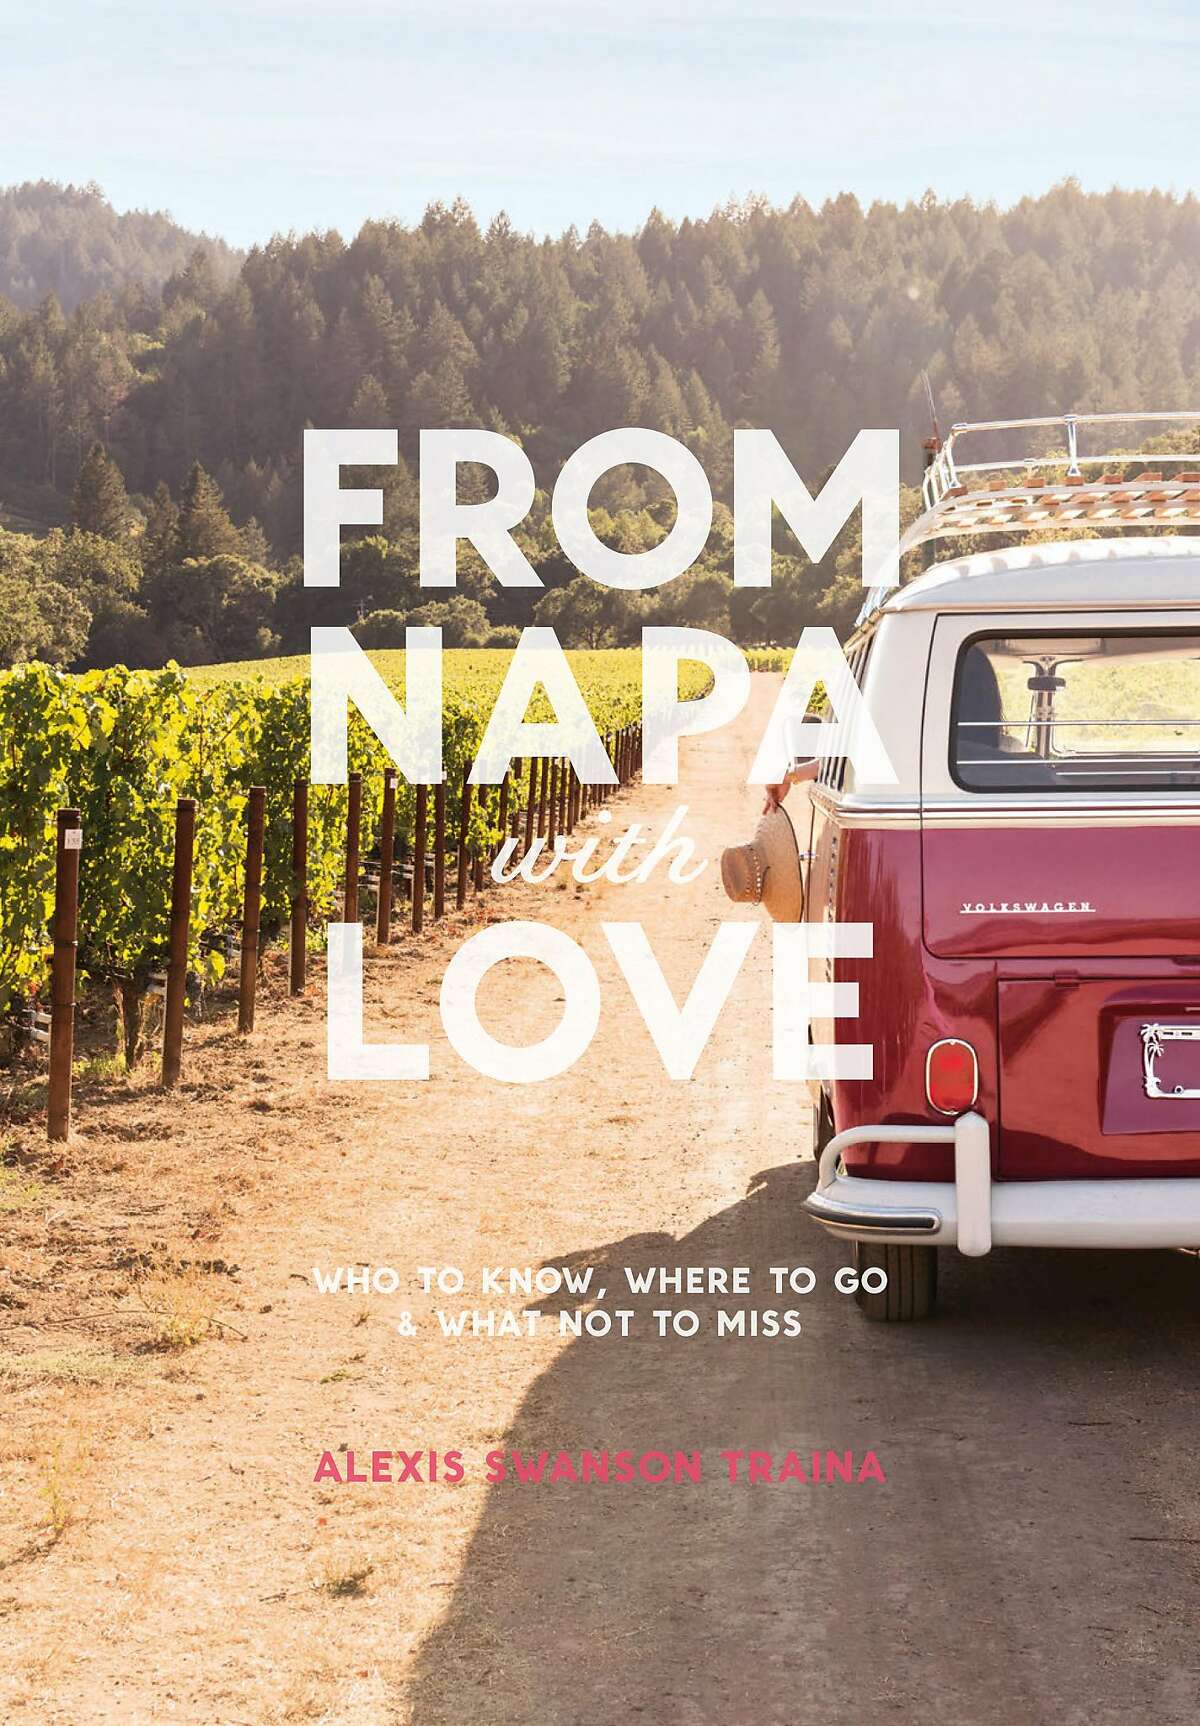 "From Napa with Love"�by Alexis Traina (ABRAMS c 2017 highlights creative Wine Country impresarios -- from sommelier, chefs and designers to artists and bohemian bon vivants -- as well as�advice and picks, playfully designed by graphic artist Alyssa Warnock.